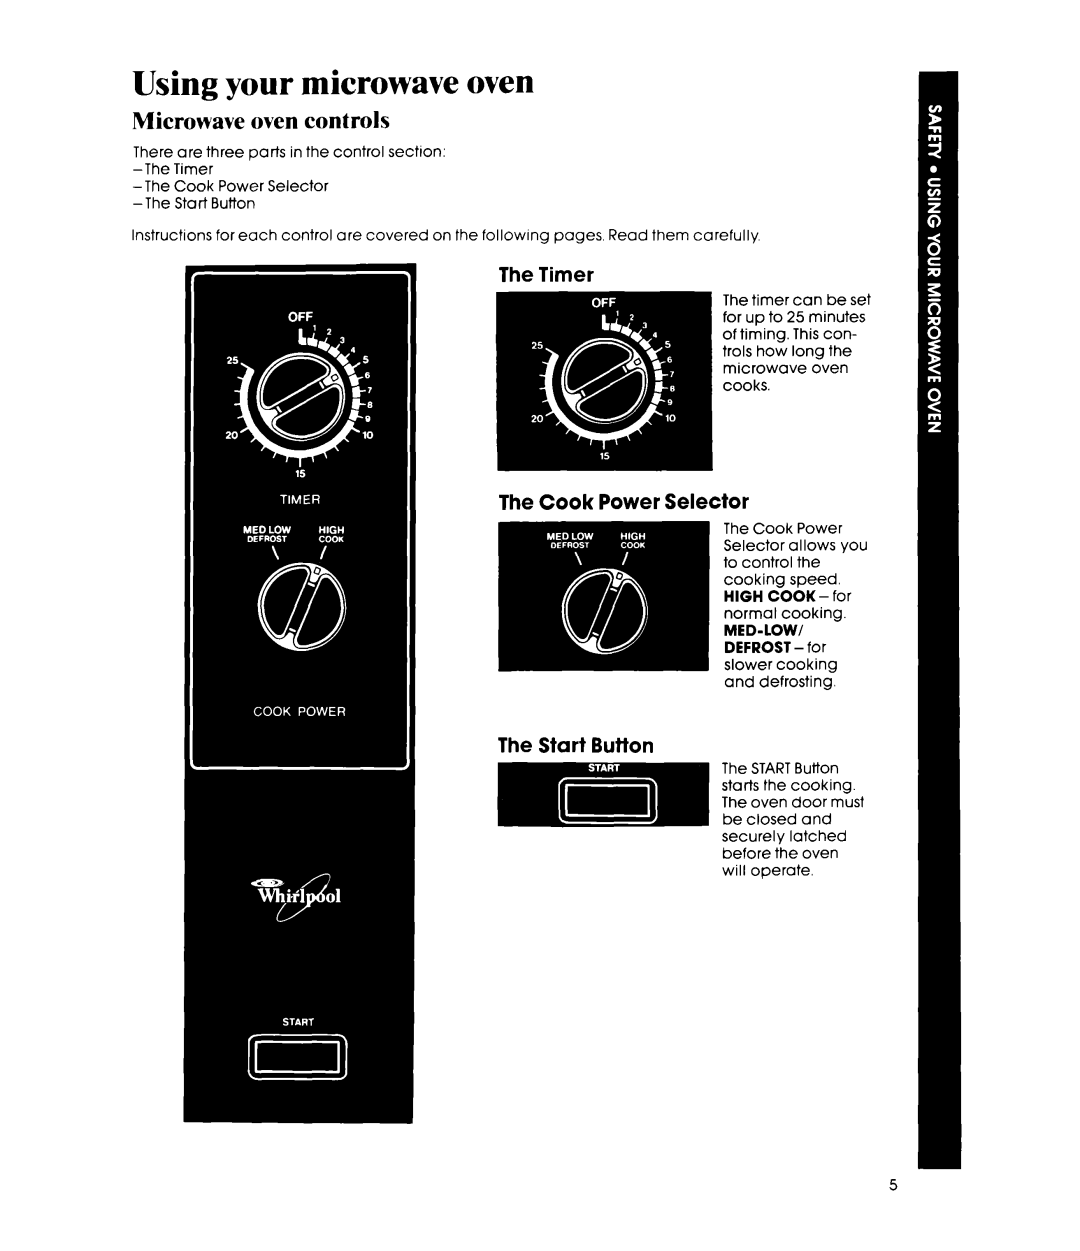 Whirlpool MW81OOXP manual Using your microwave oven, Microwave oven controls, The Cook Power Selector, The Start Button 